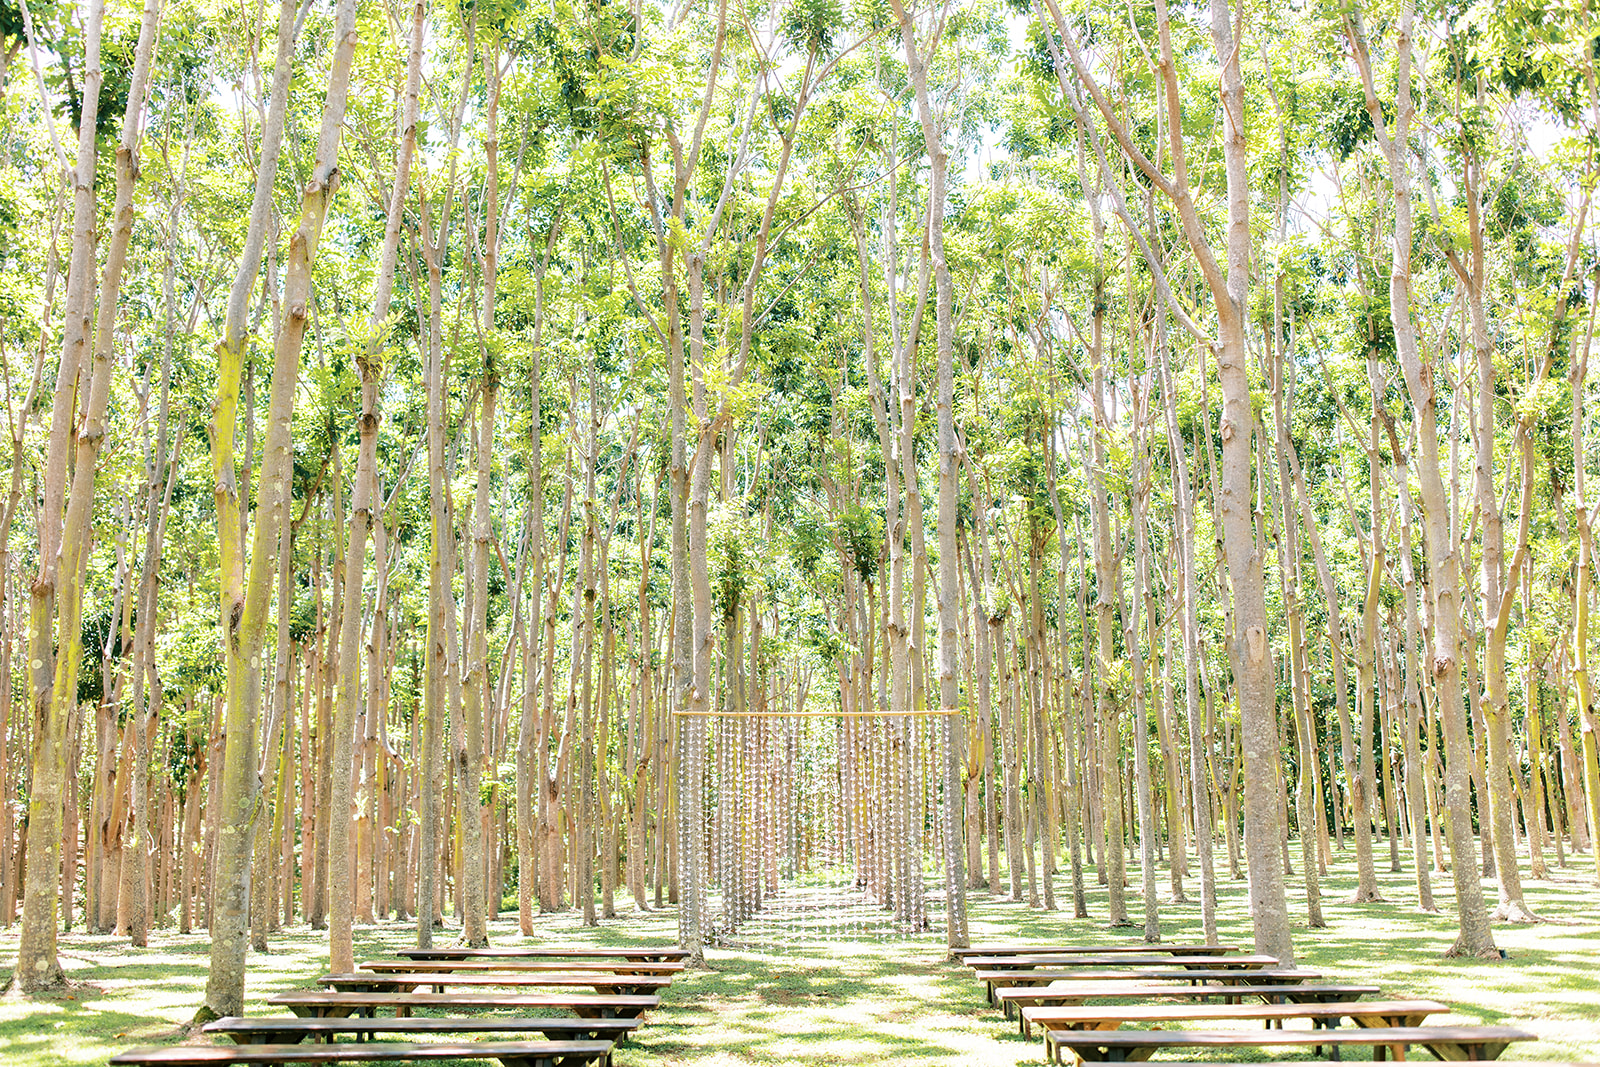 Wedding at Na ‘Āina Kai Botanical GardensOutdoor venue set up with wooden benches and a gazebo surrounded by tall trees